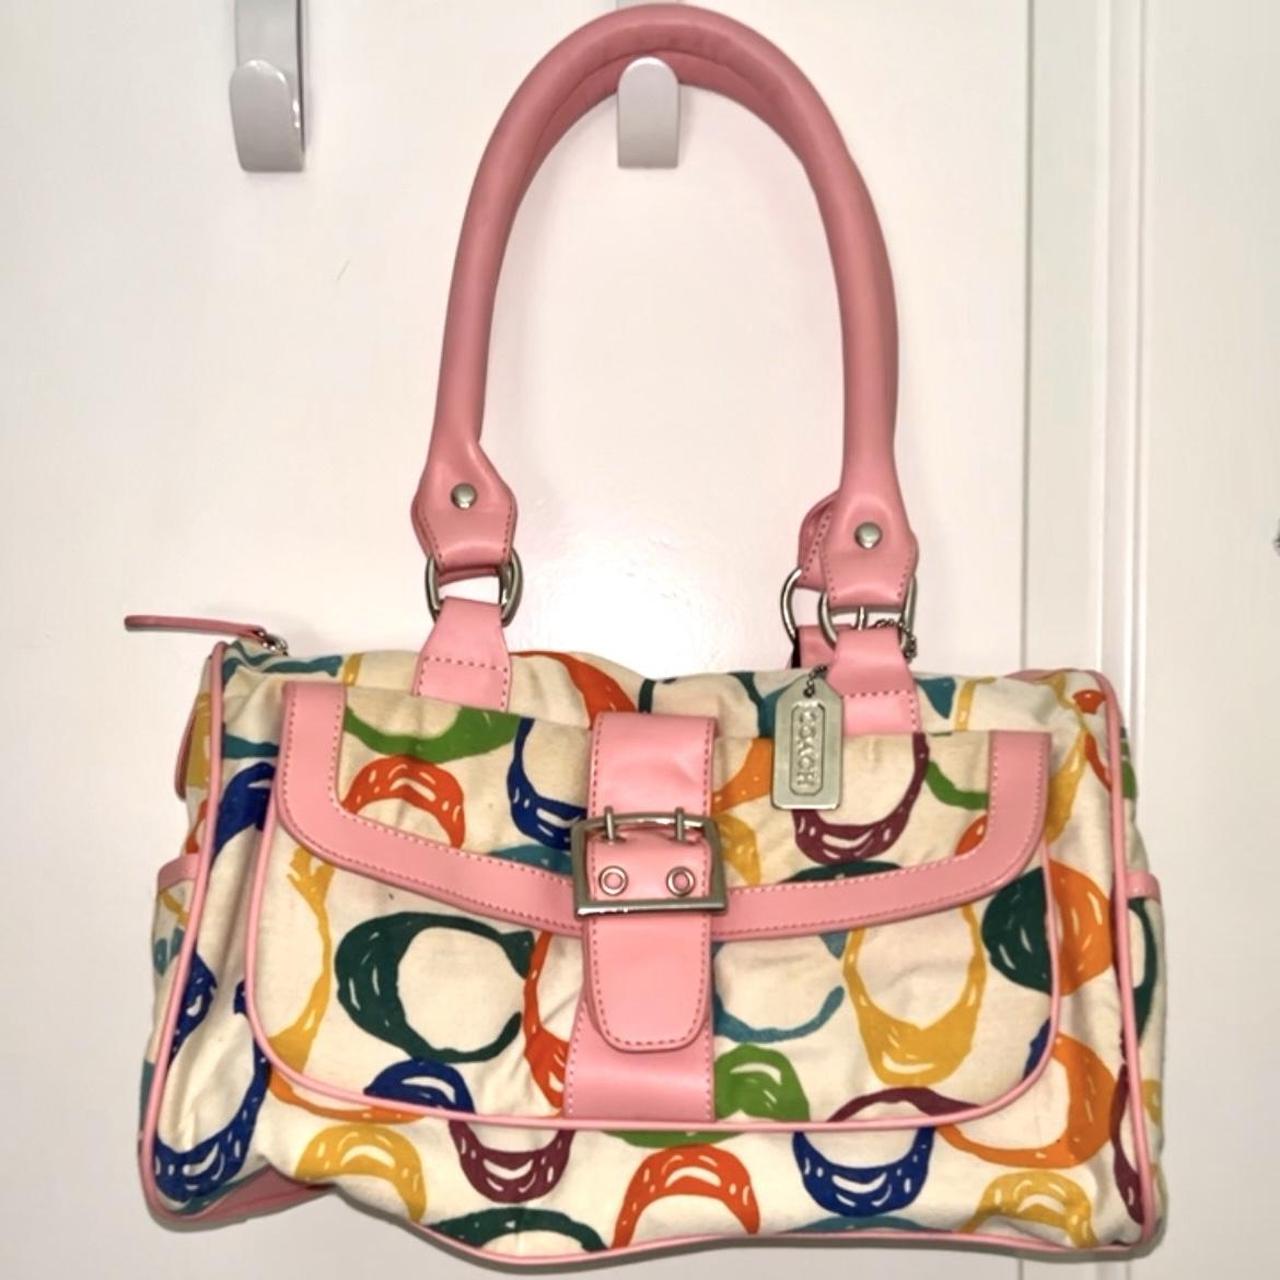 Coach Bright Multi-color Fabric Cross-body and 50 similar items